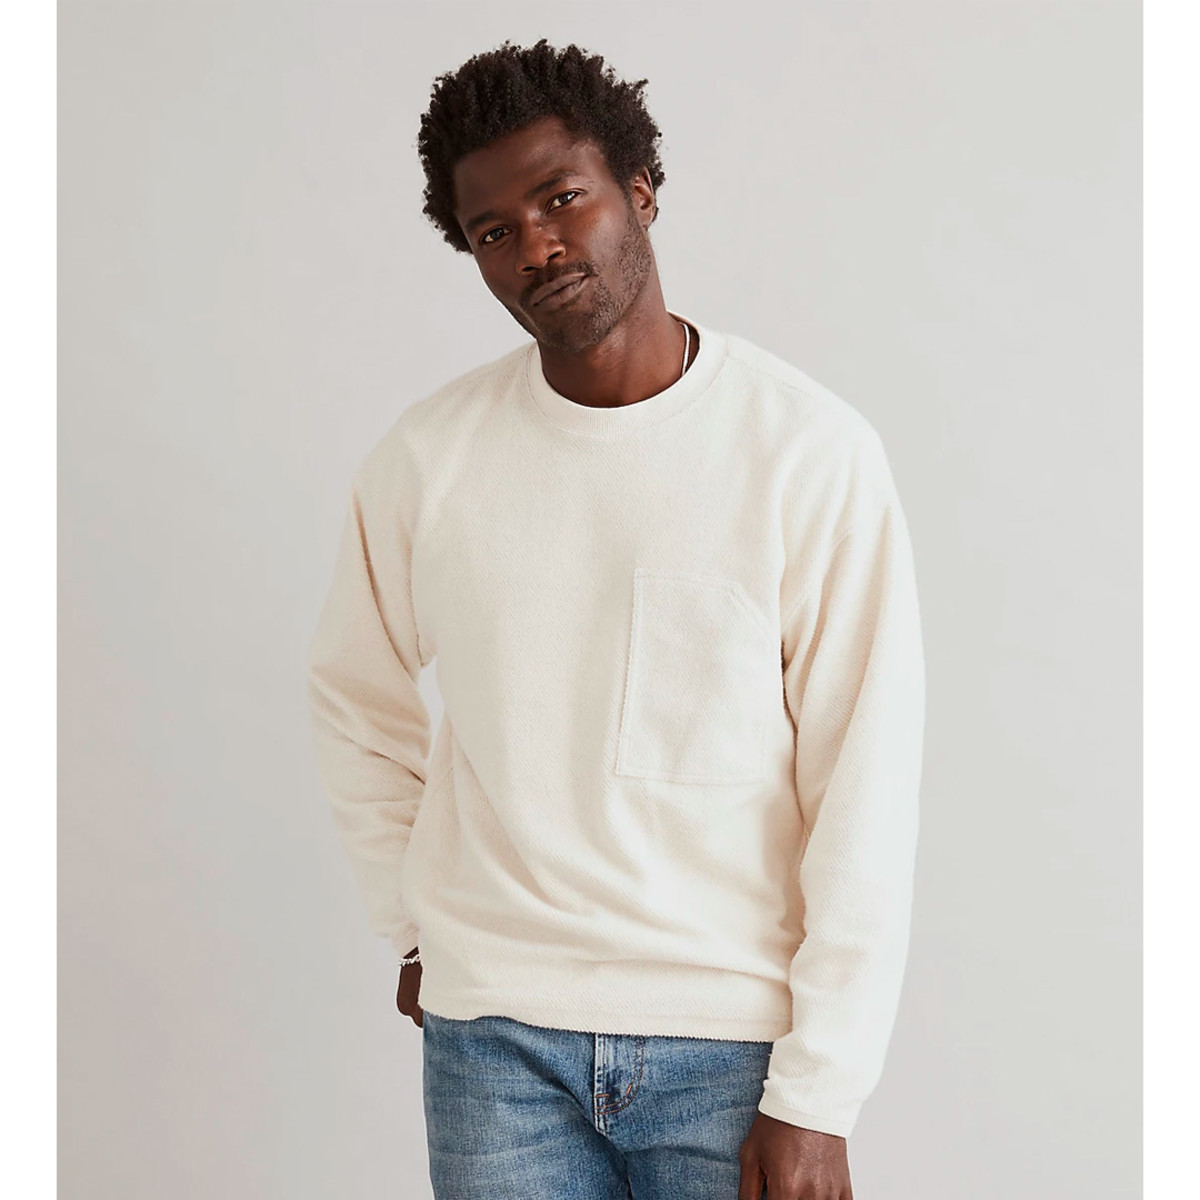 Madewell's Winter Sale Is Live With an Extra 30% Off Sale - Men's Journal